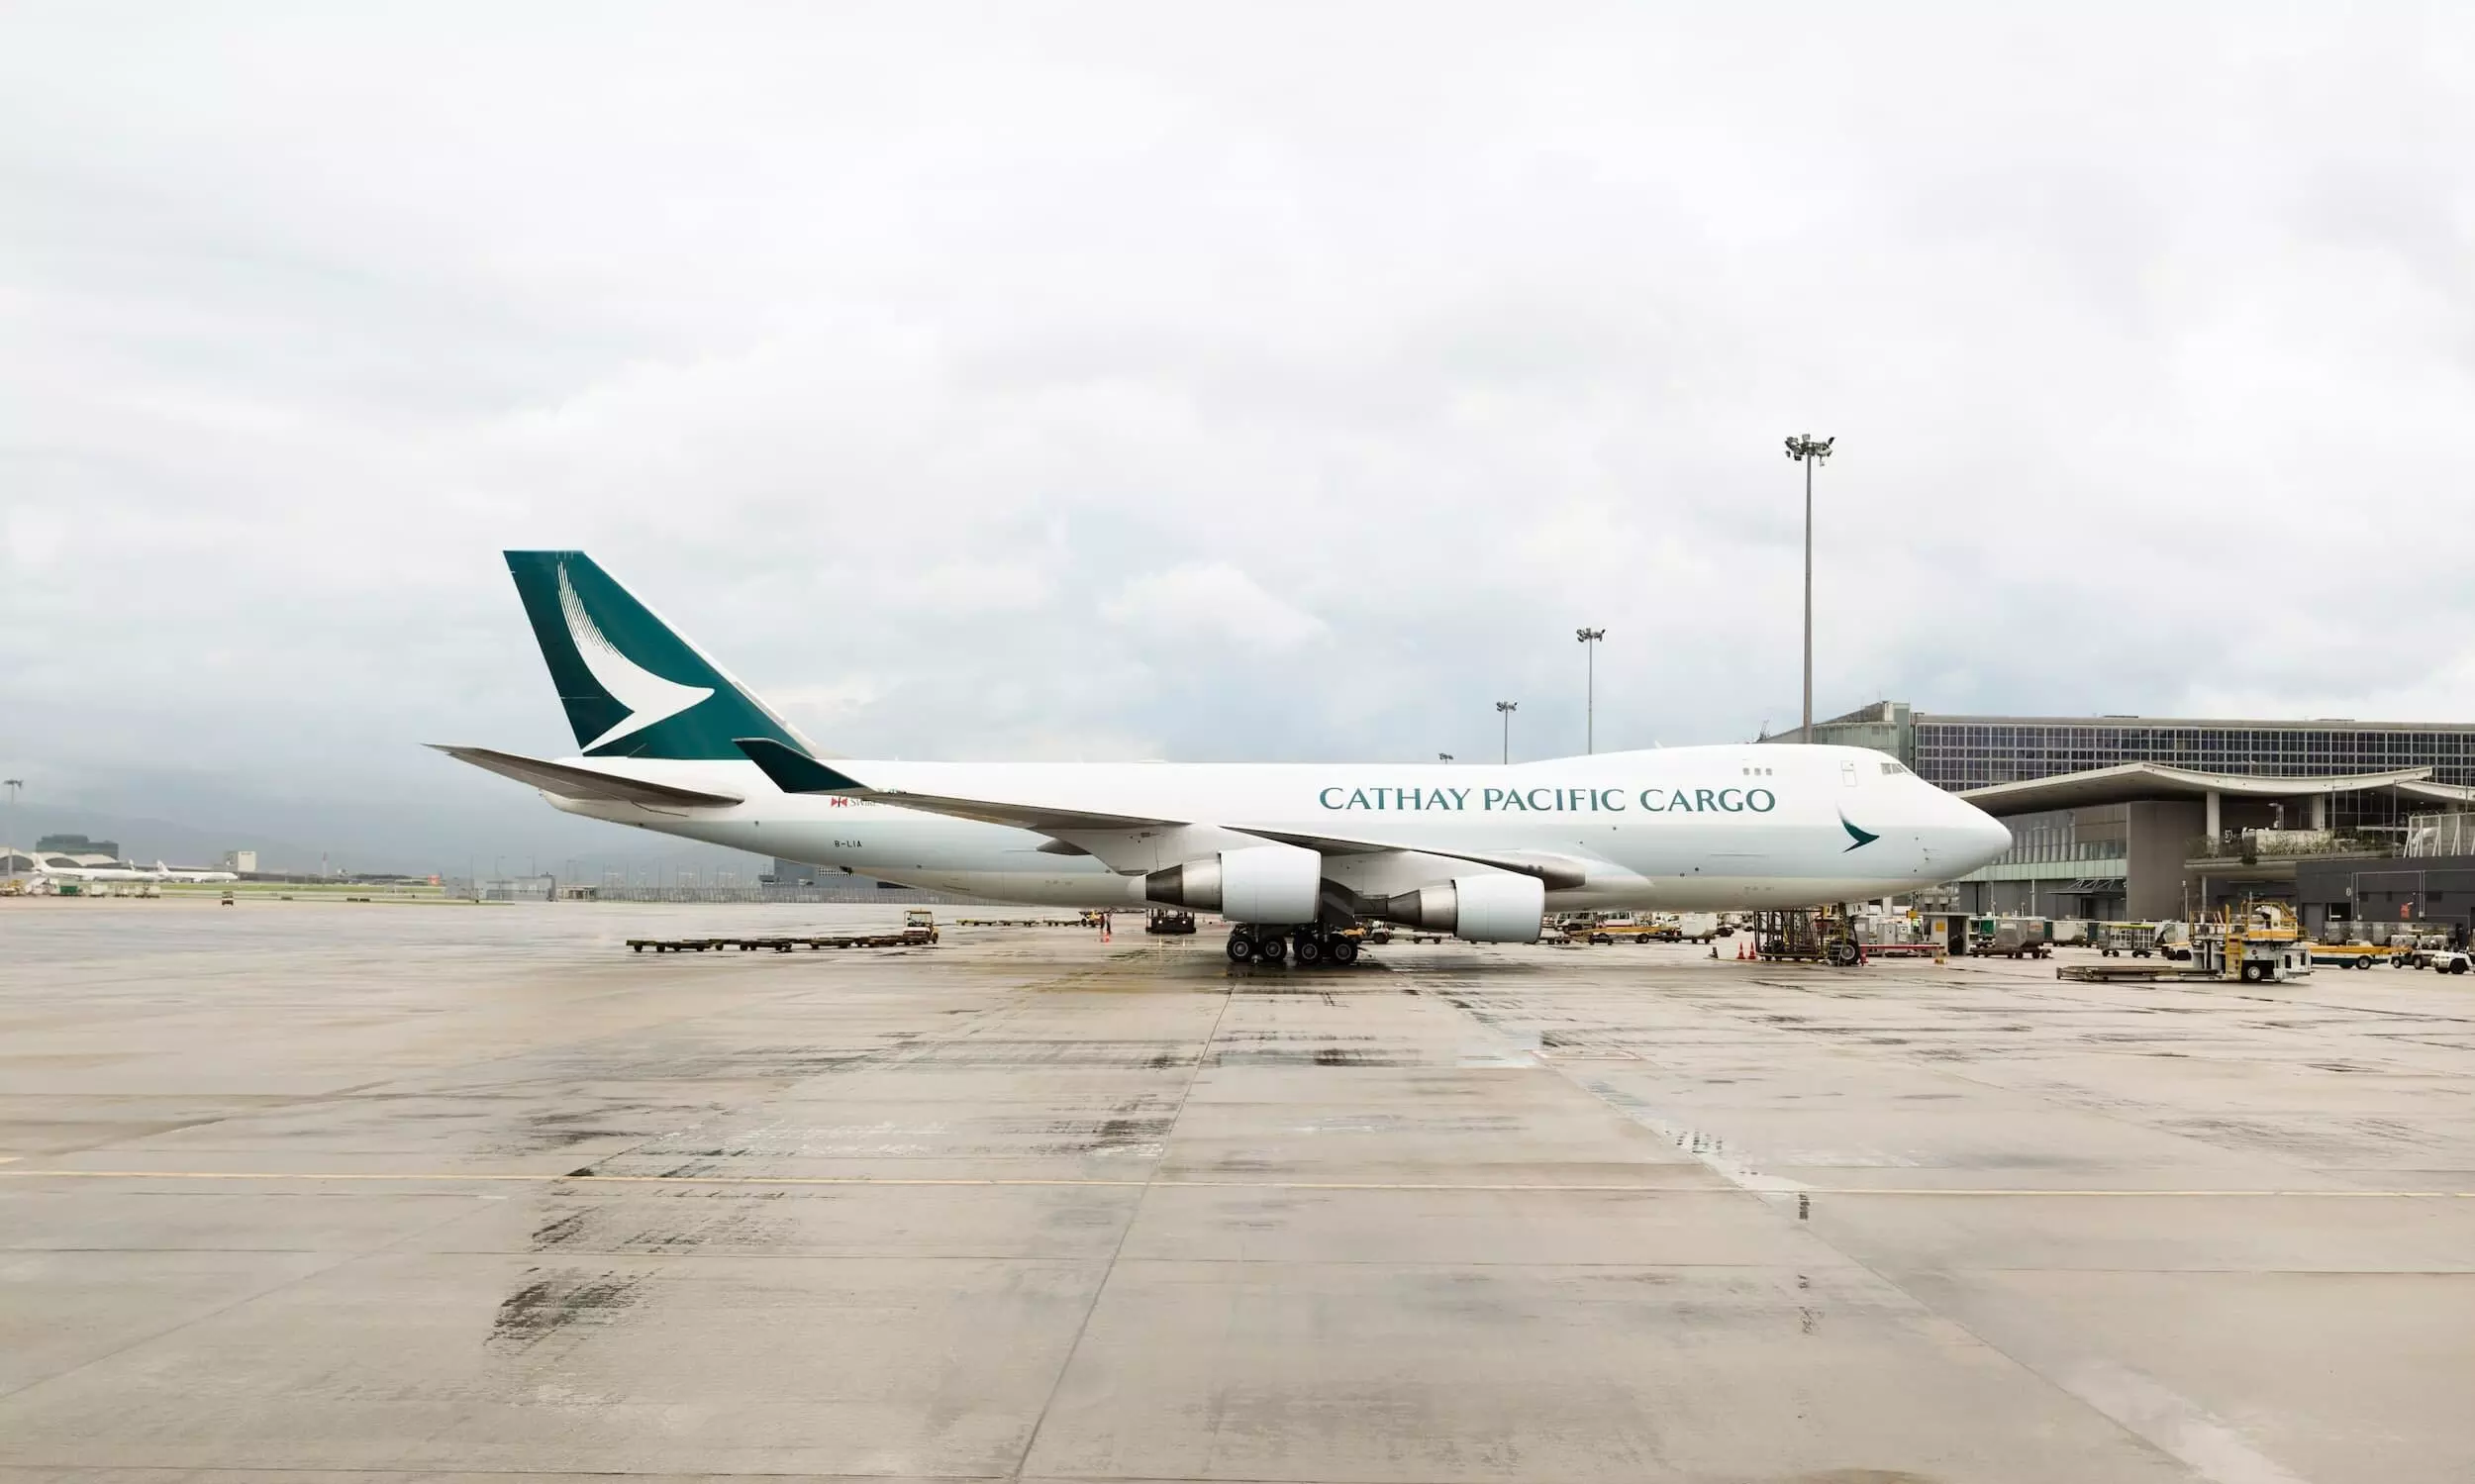 Cathay Pacific cargo carried up 18% in April